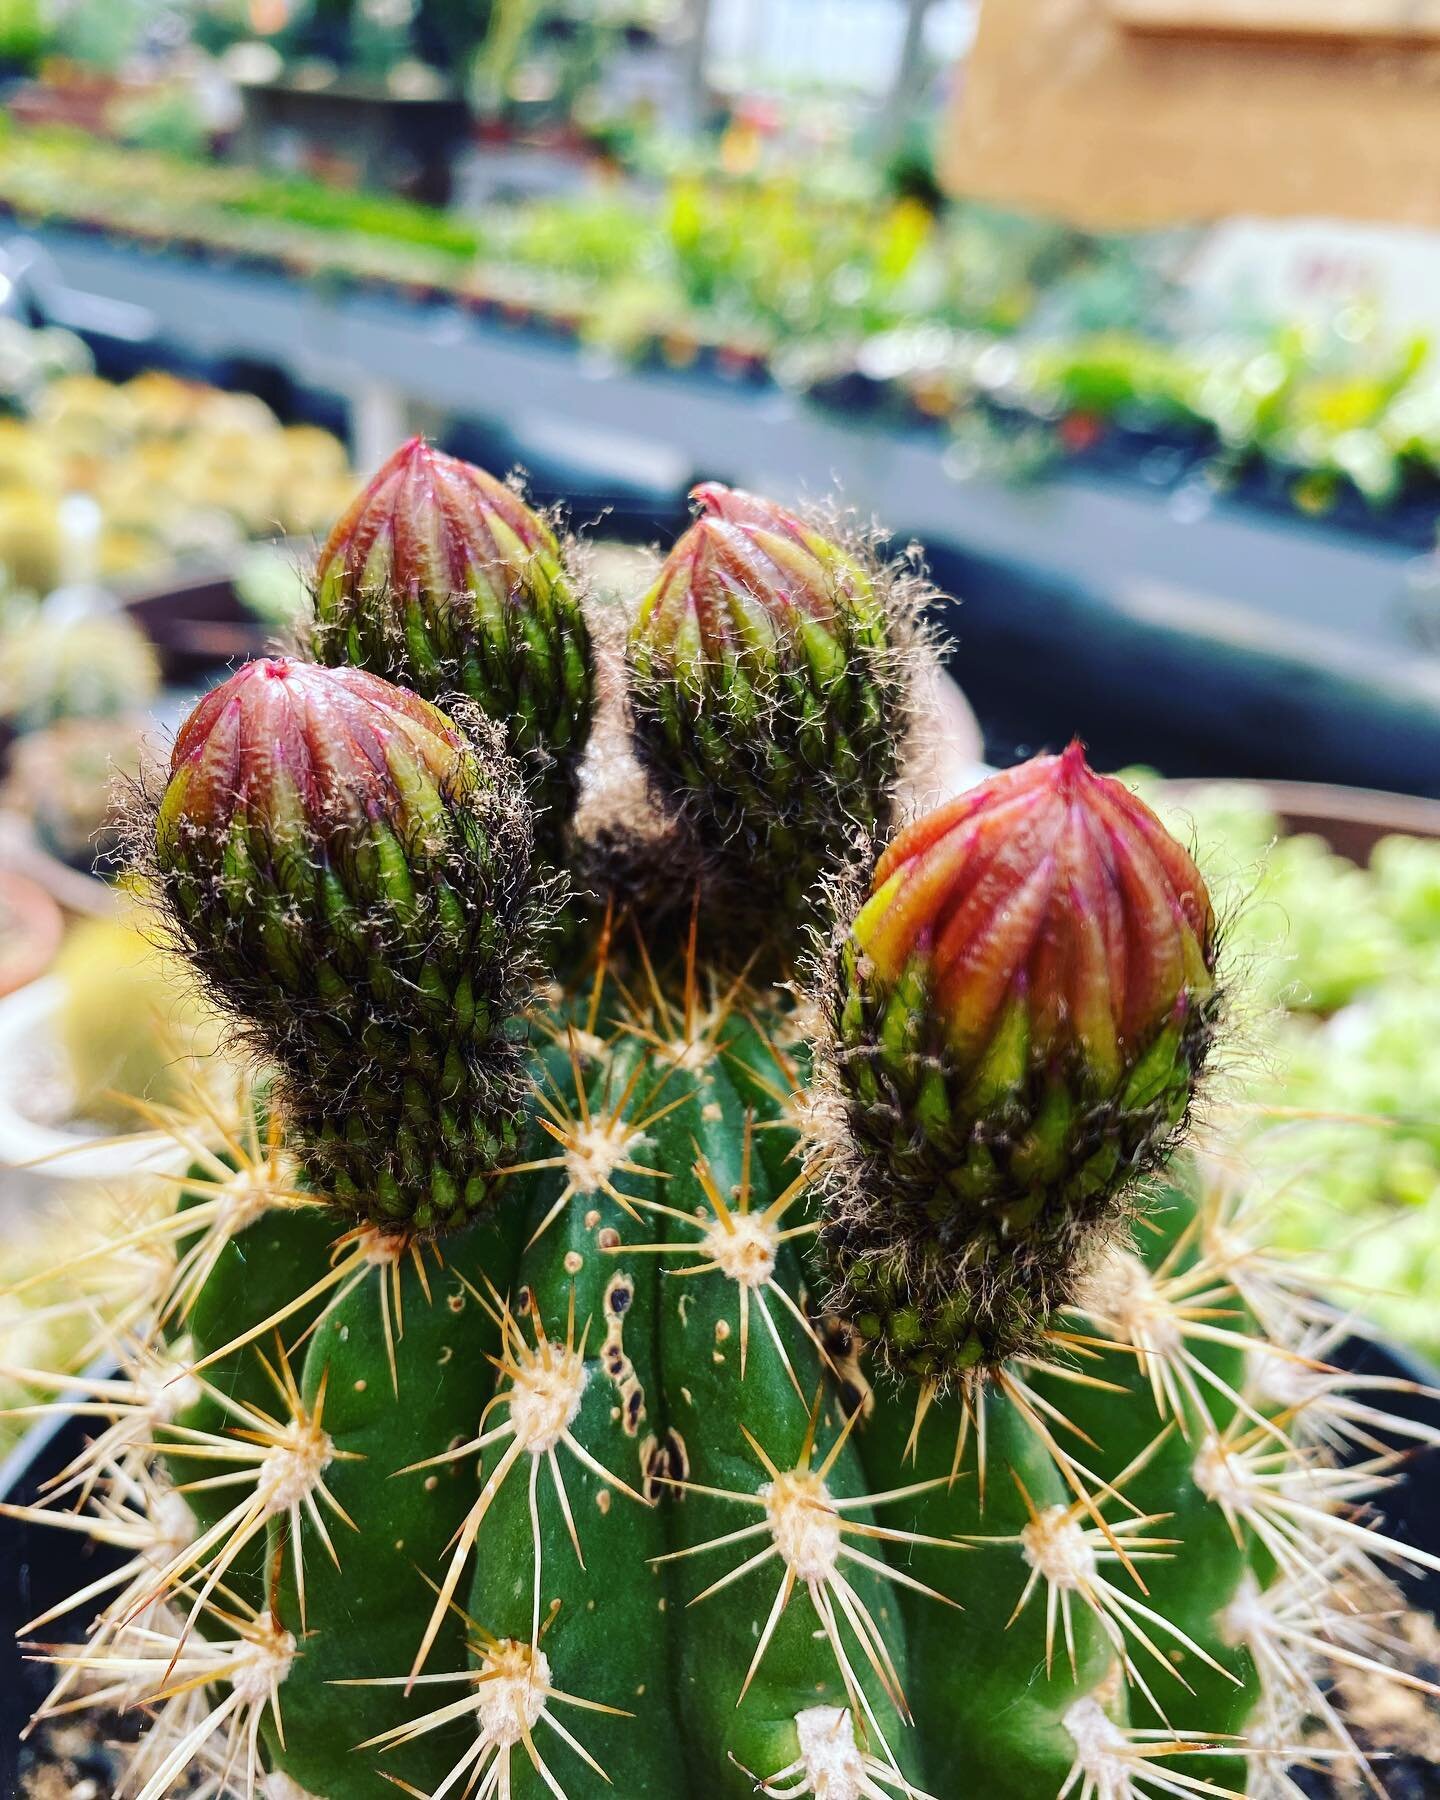 Yes you see that correctly!
4 blooms are coming 😊 
We are open 9 to 7
#deherdtgardens 
#barrheadsgardencenter 
#springatdeherdtgardens 
#cacti